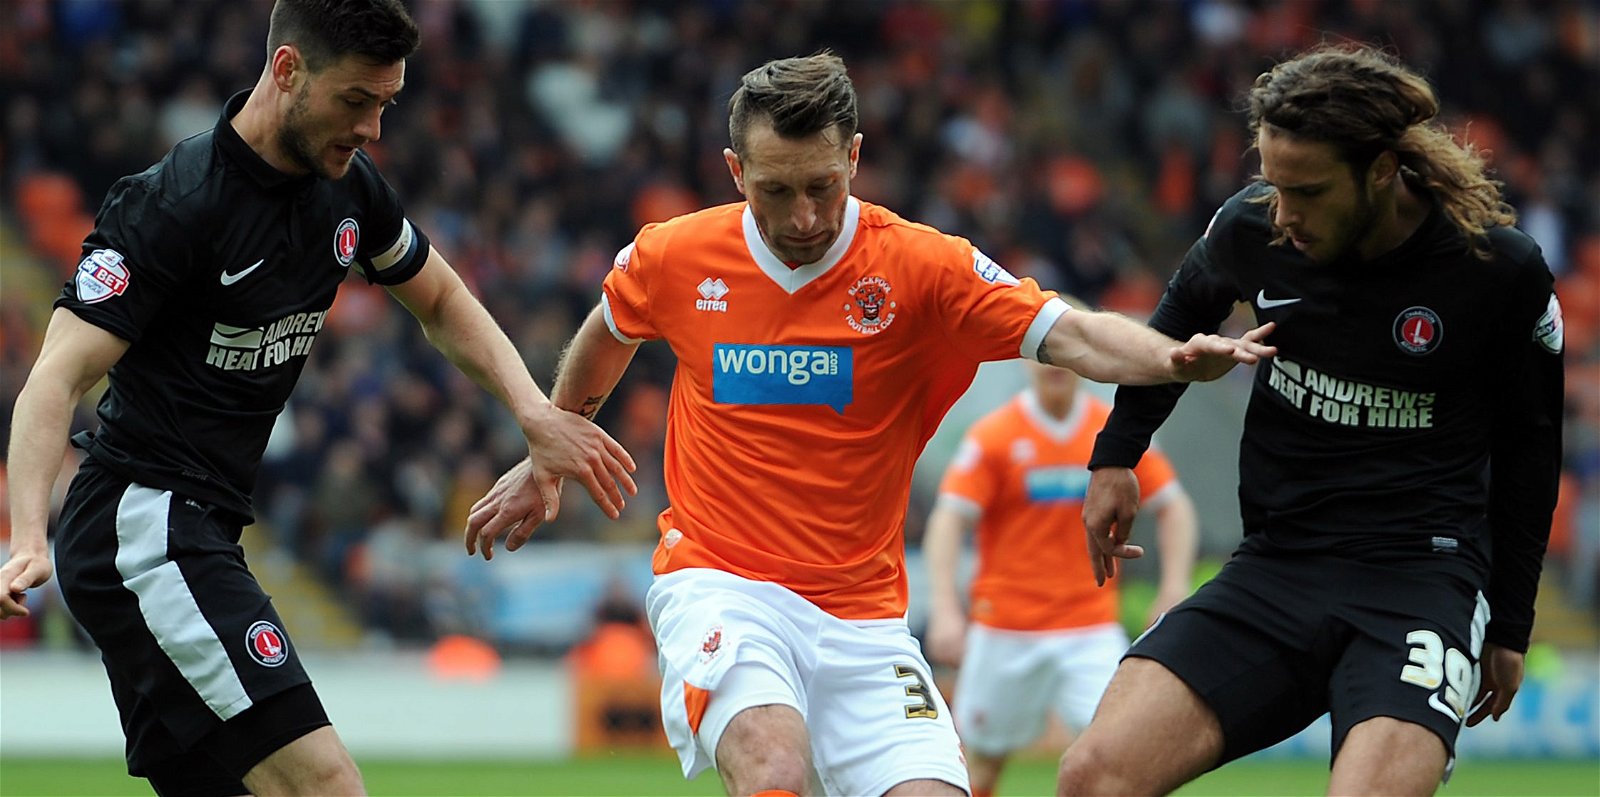 Swansea City Blackpool Bolton Wanderers, Ex-Football League man plays final game for Scottish side